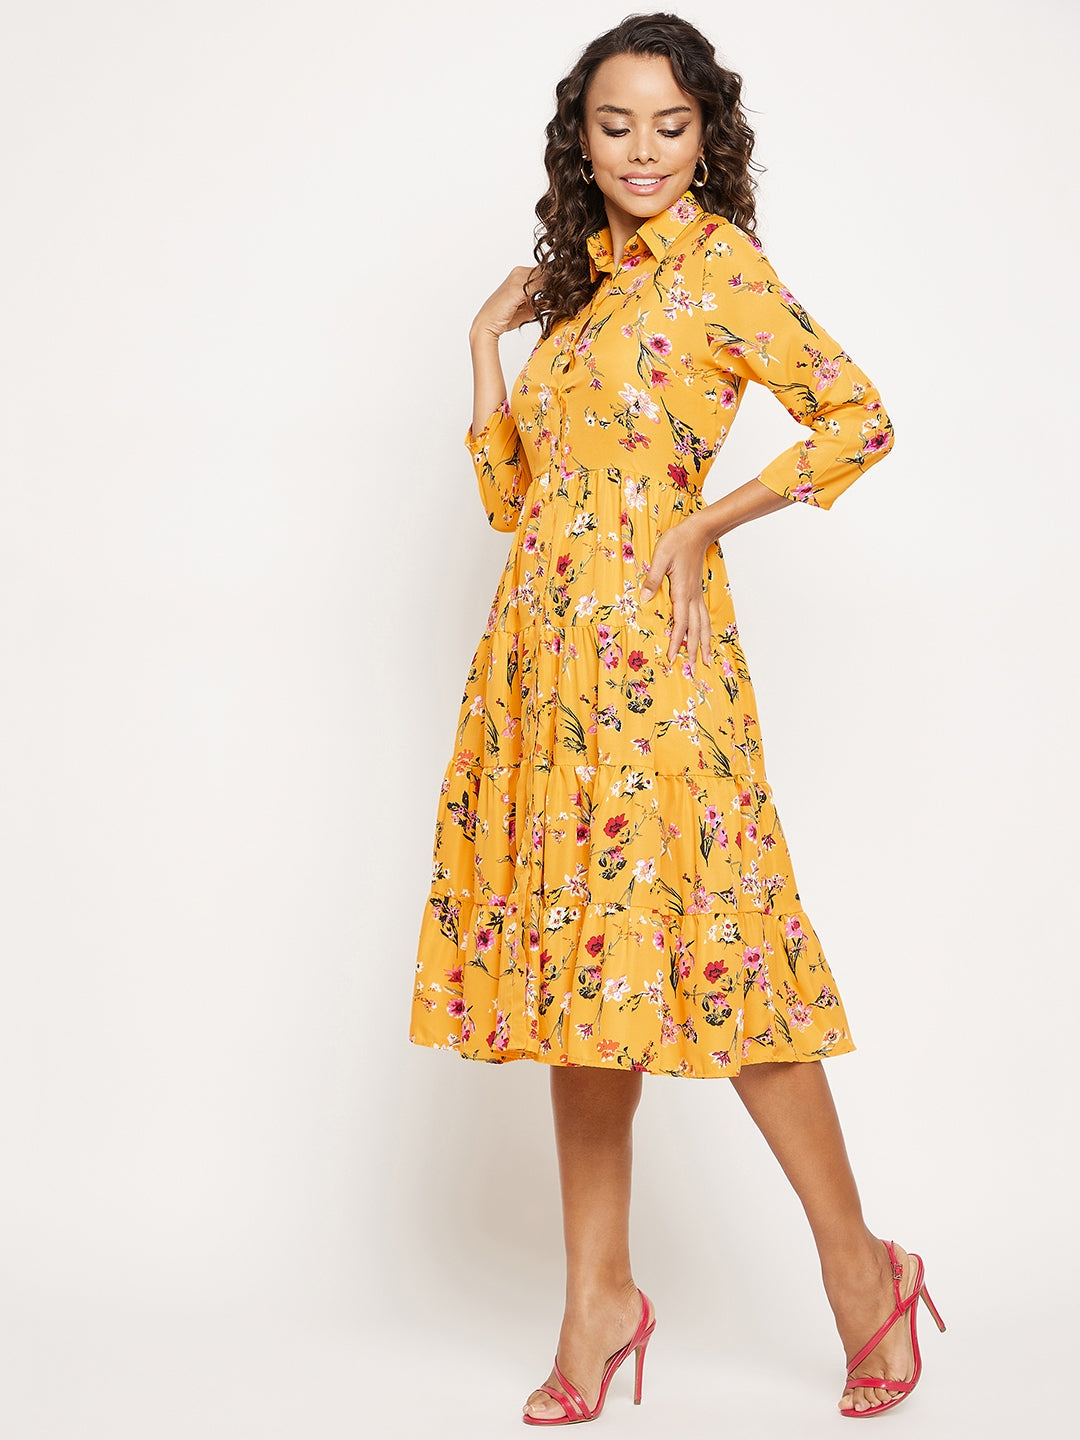 Printed Fit & Flare Skater Dress - Uptownie